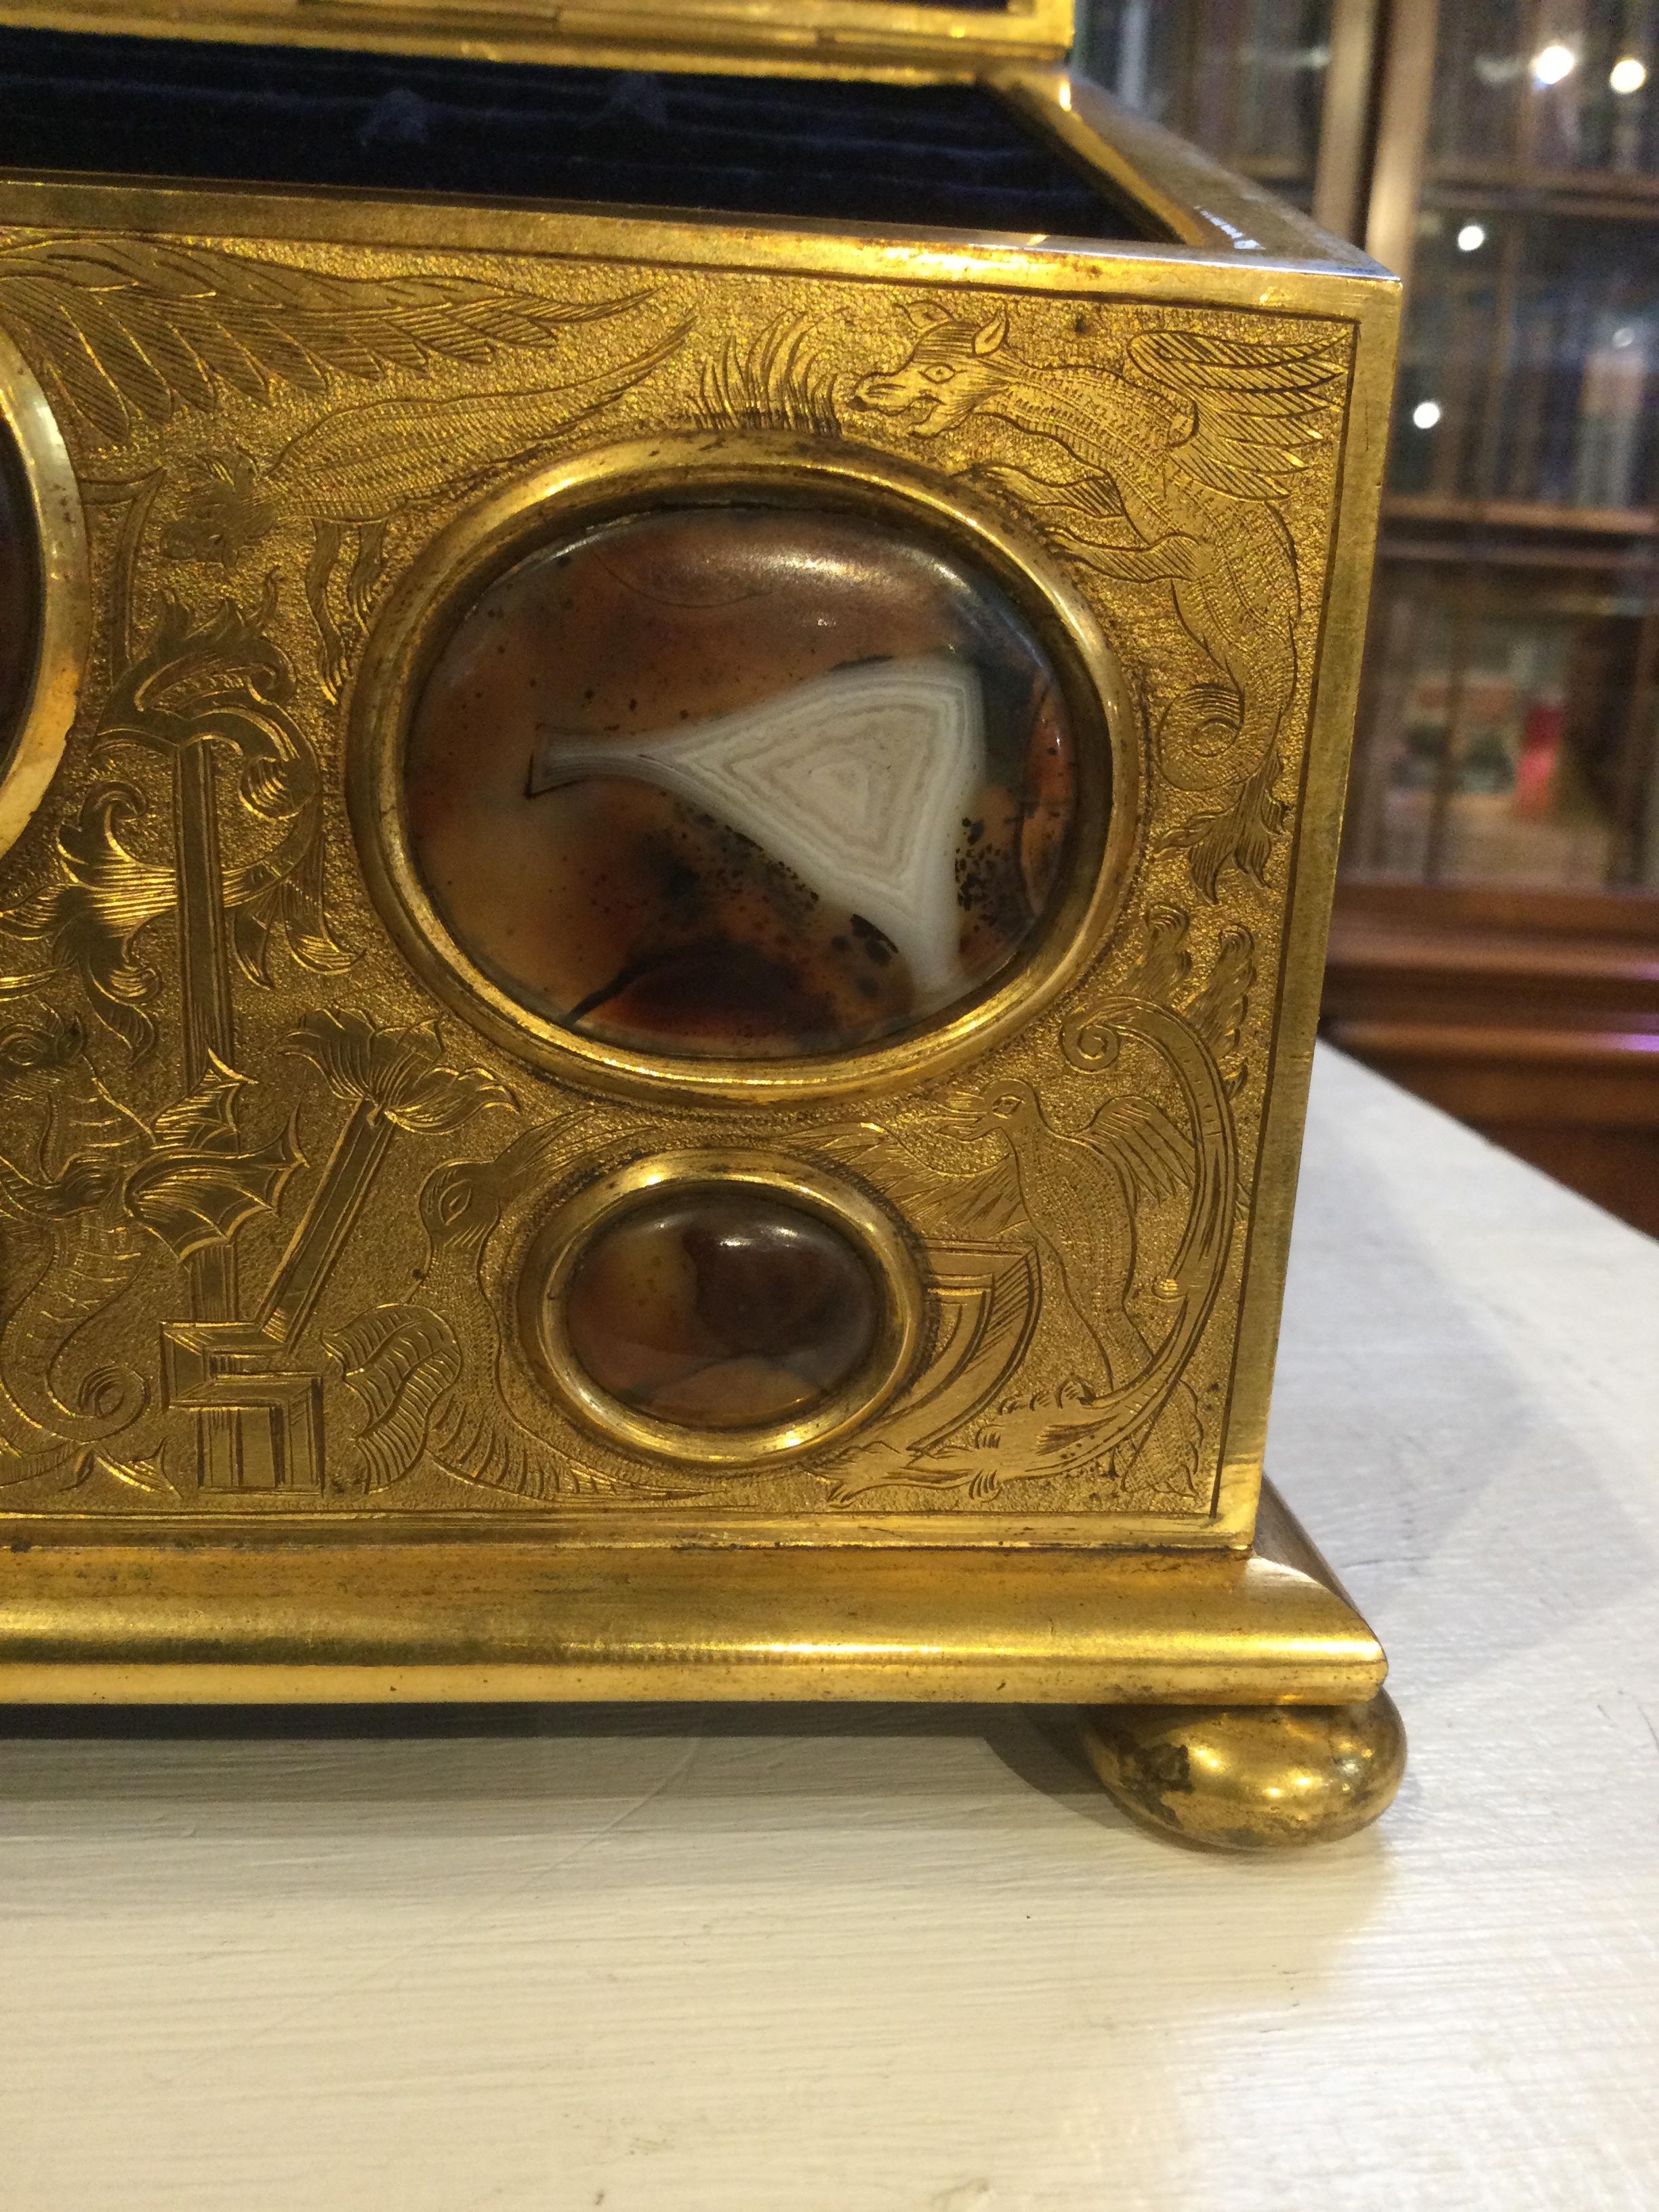 A 19th century correspondence gilt box with engraved decoration and inset cabochon stones hardstones - Image 21 of 25